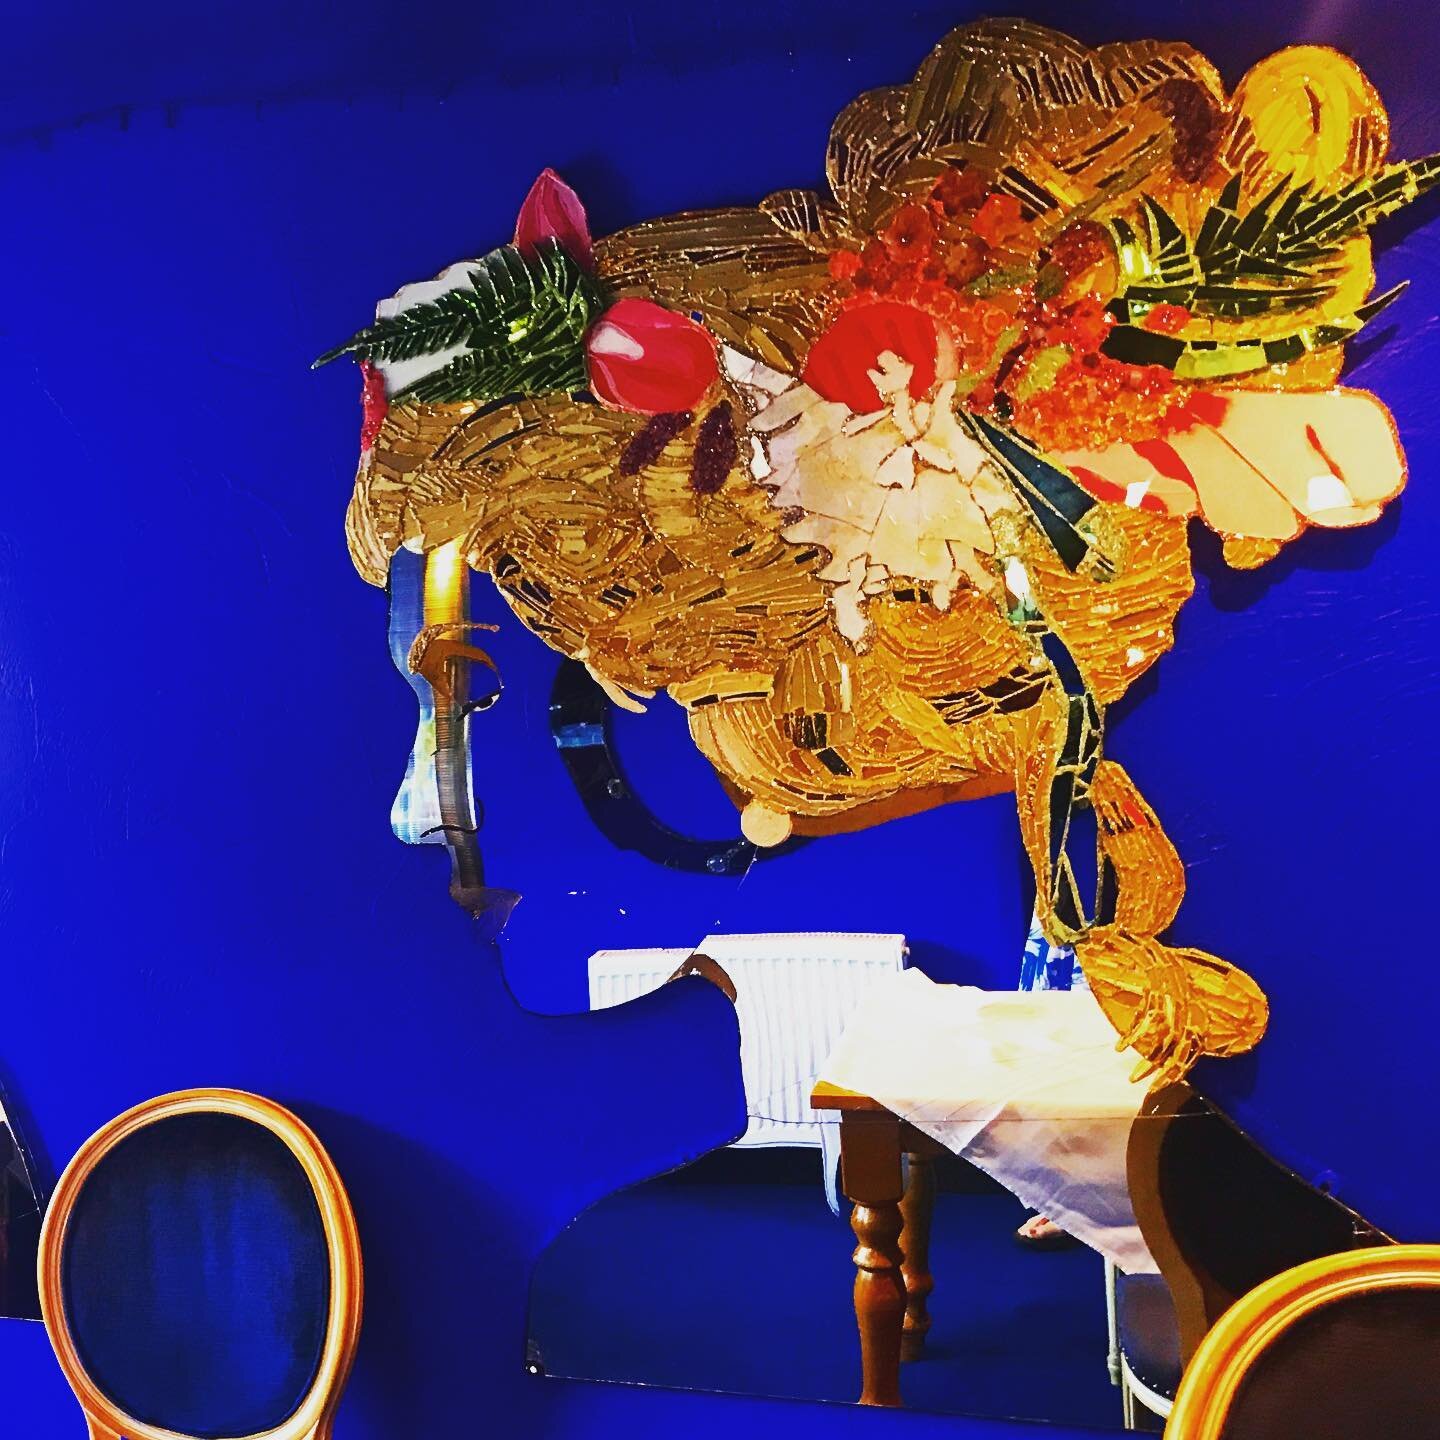 We had a lovely visit to the beautiful and inspirational  @AndrewLoganmuseumofsculpture and @lion_hotel_restaurant_berriew at #berriew  #walesadventure 

#yveskleinblue dining room 

Thanks @andrewlogansculptor #artisticadventure @jill.westwood